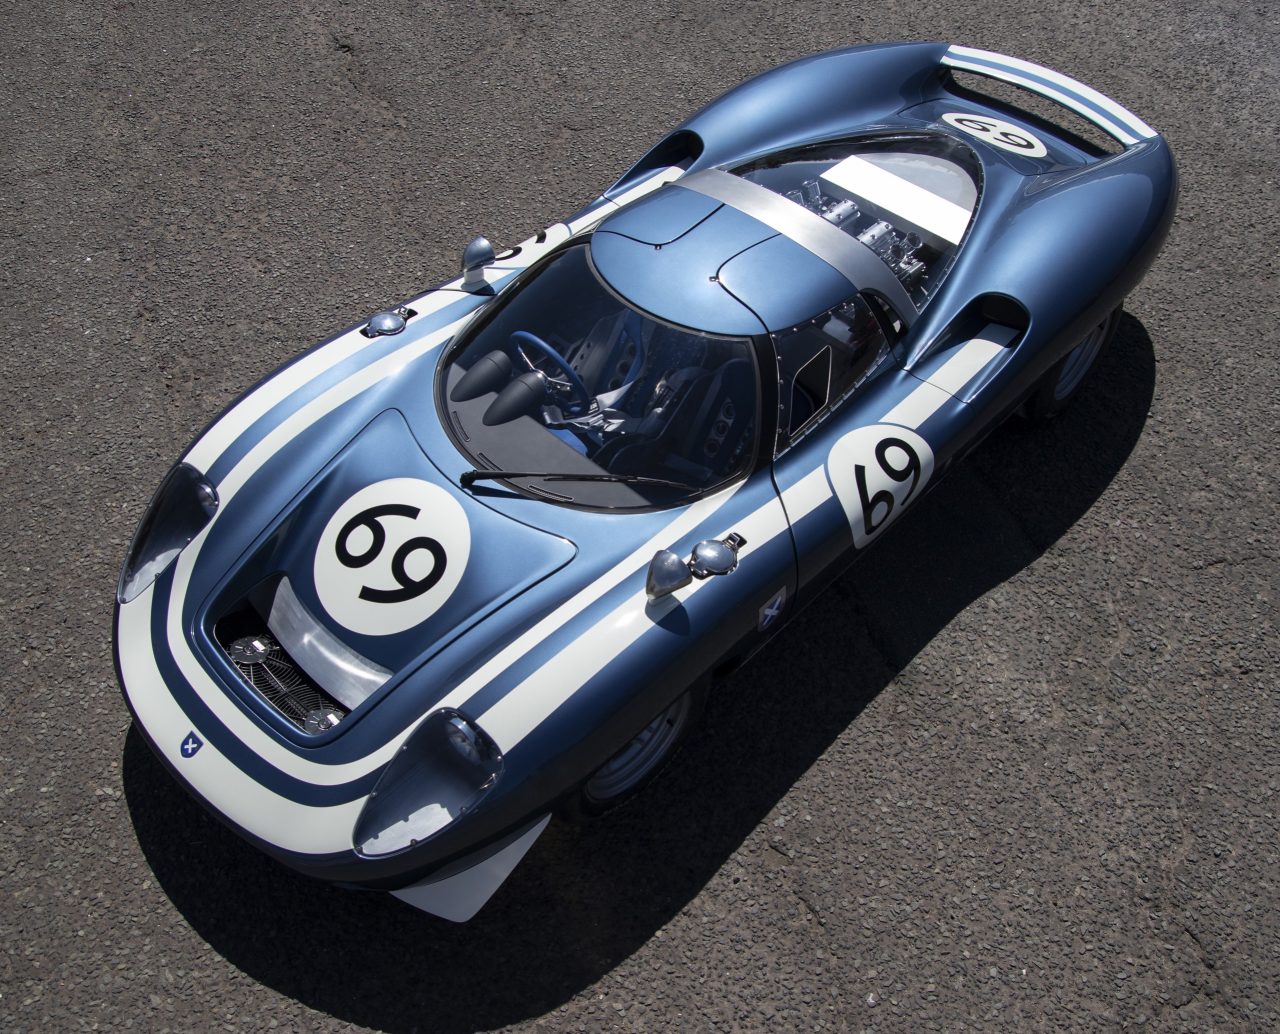 Ecurie Ecosse LM69 above front